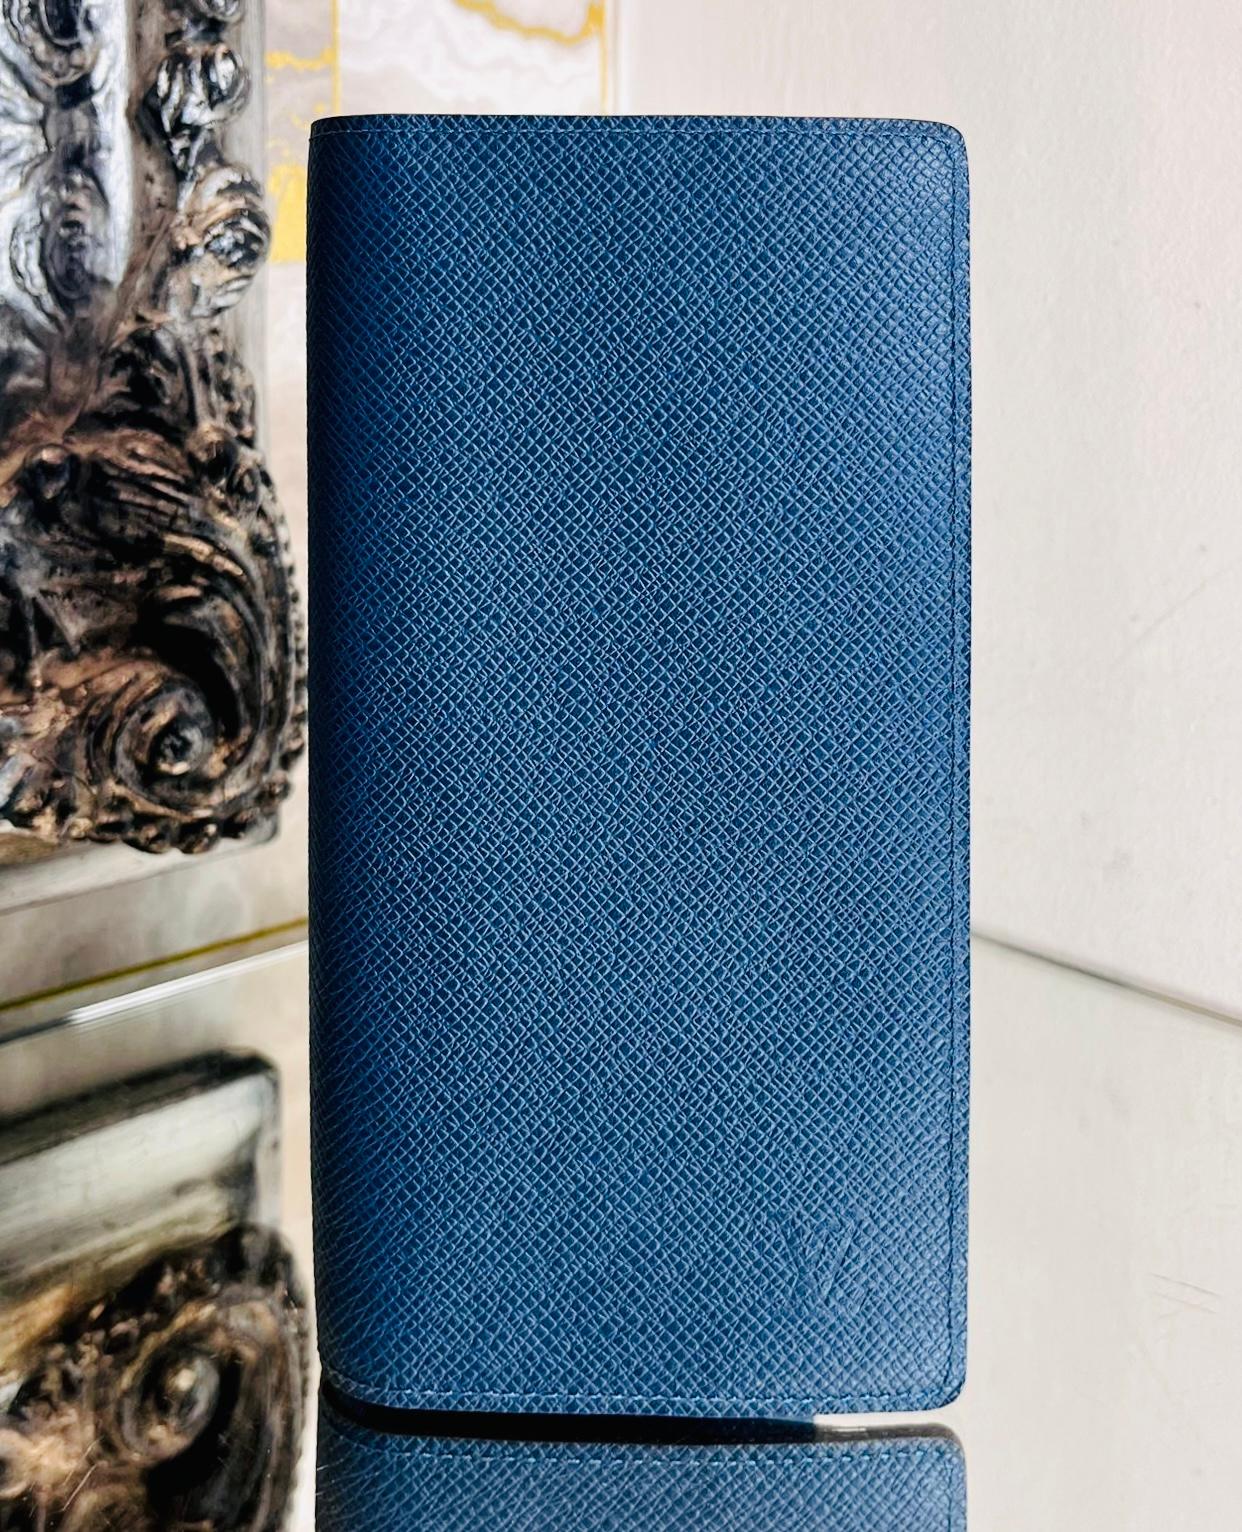 Louis Vuitton Brazza Leather Wallet

Blue wallet crafted from the brand's signature Taiga leather.

Designed with 'LV' logo embossed to the corner and silver 'Louis Vuitton' engraved zipper.

Styled with zipped compartment for coins, multiple card